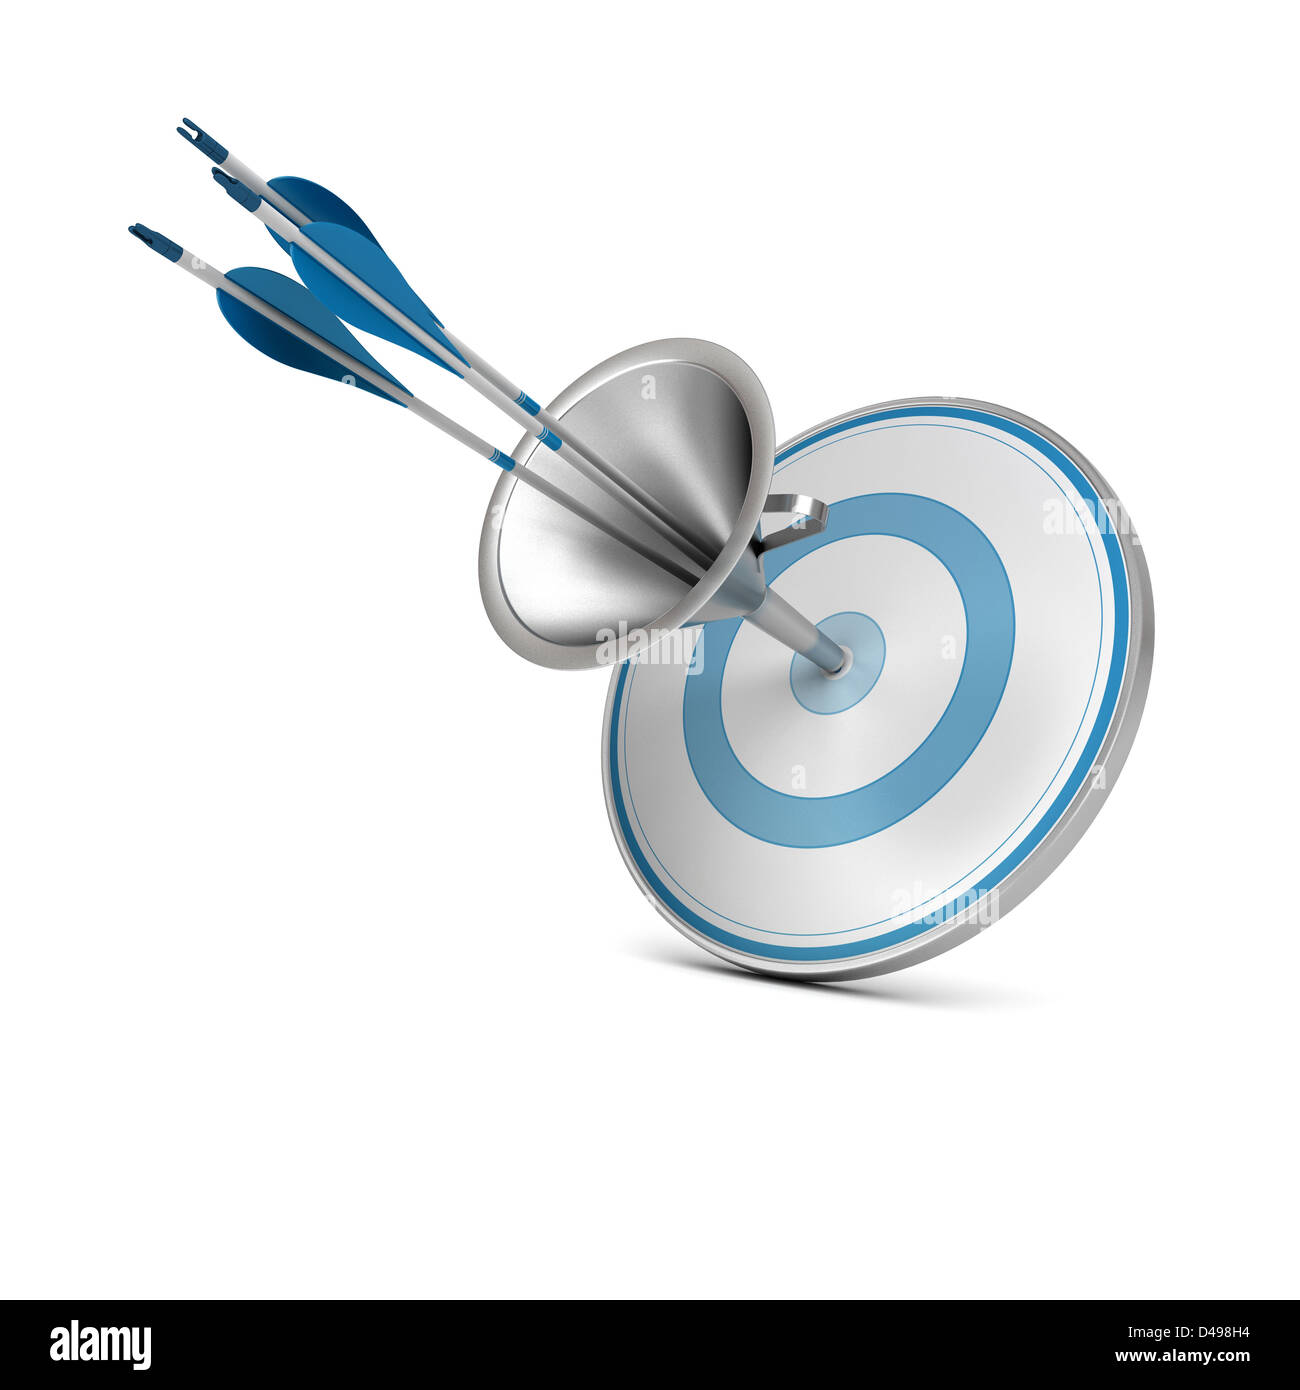 One blue target pierced by three arrows thanks to a funnel, image over white background. Stock Photo